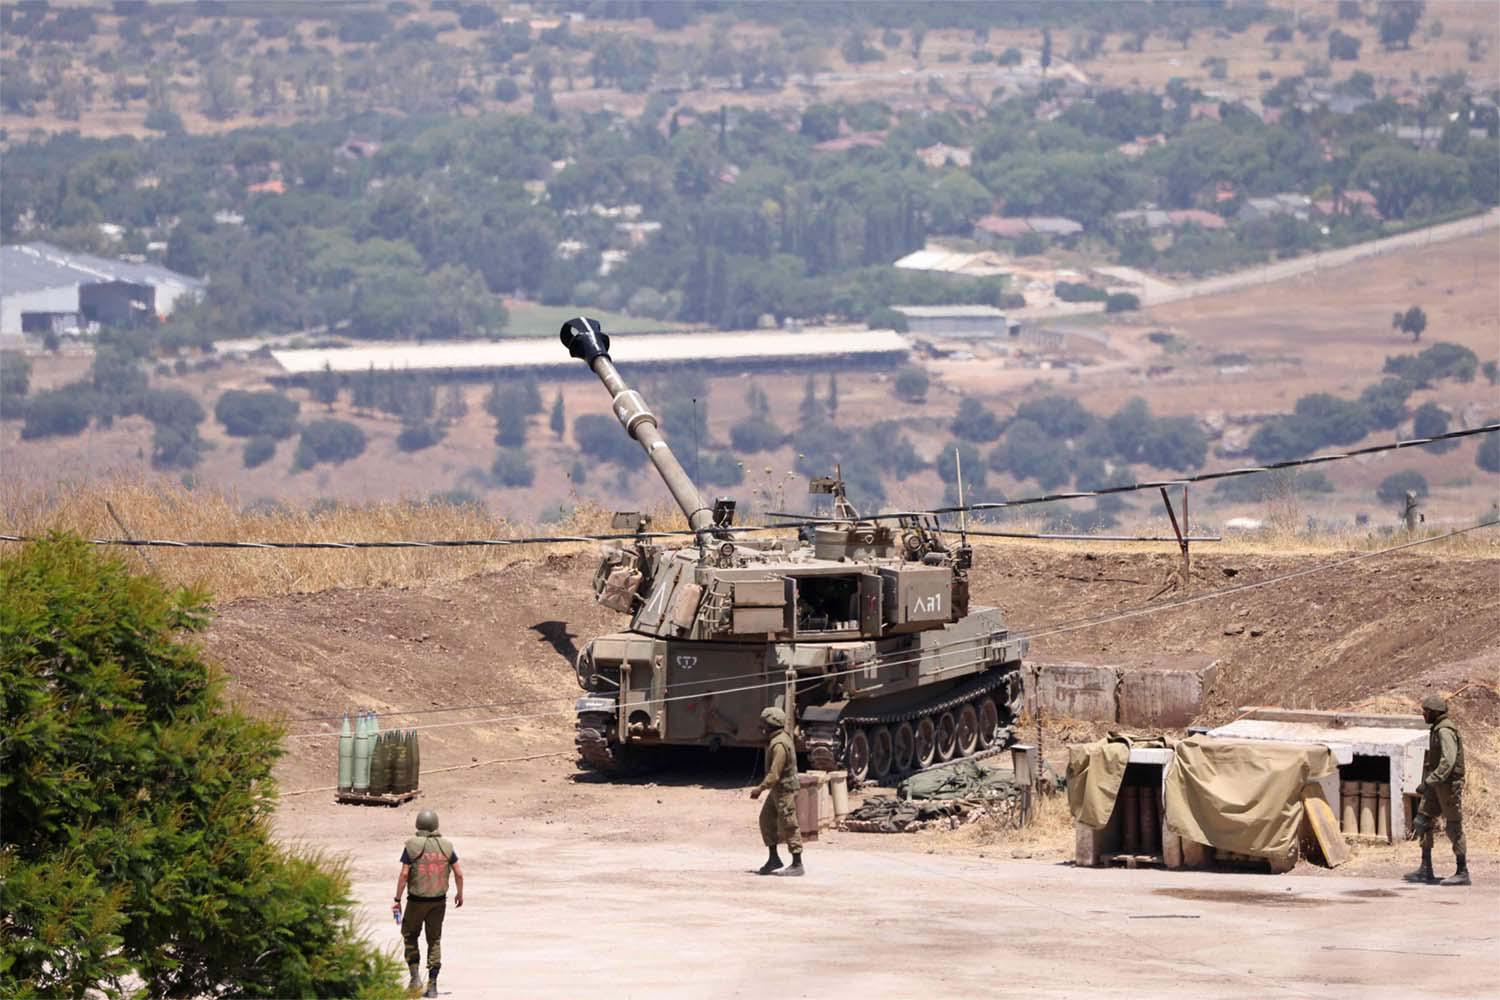 Israeli soldiers stand near an army tank on the outskirts of Kiryat Shmona near Israel's border with Lebanon